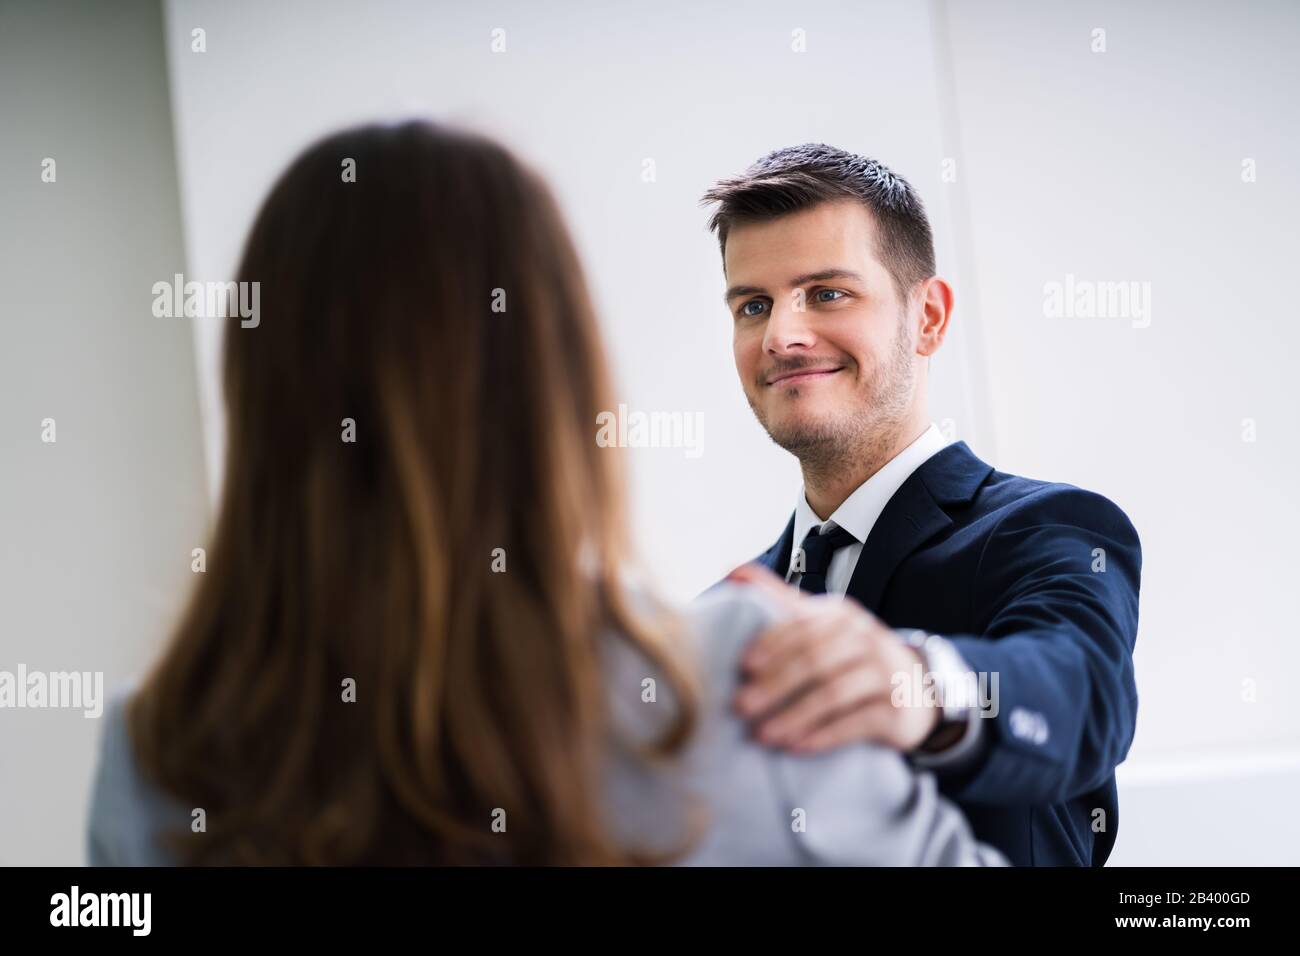 Businessman Putting His Hand On Female Colleague's Shoulder Congratulating Her On Success In Office Stock Photo